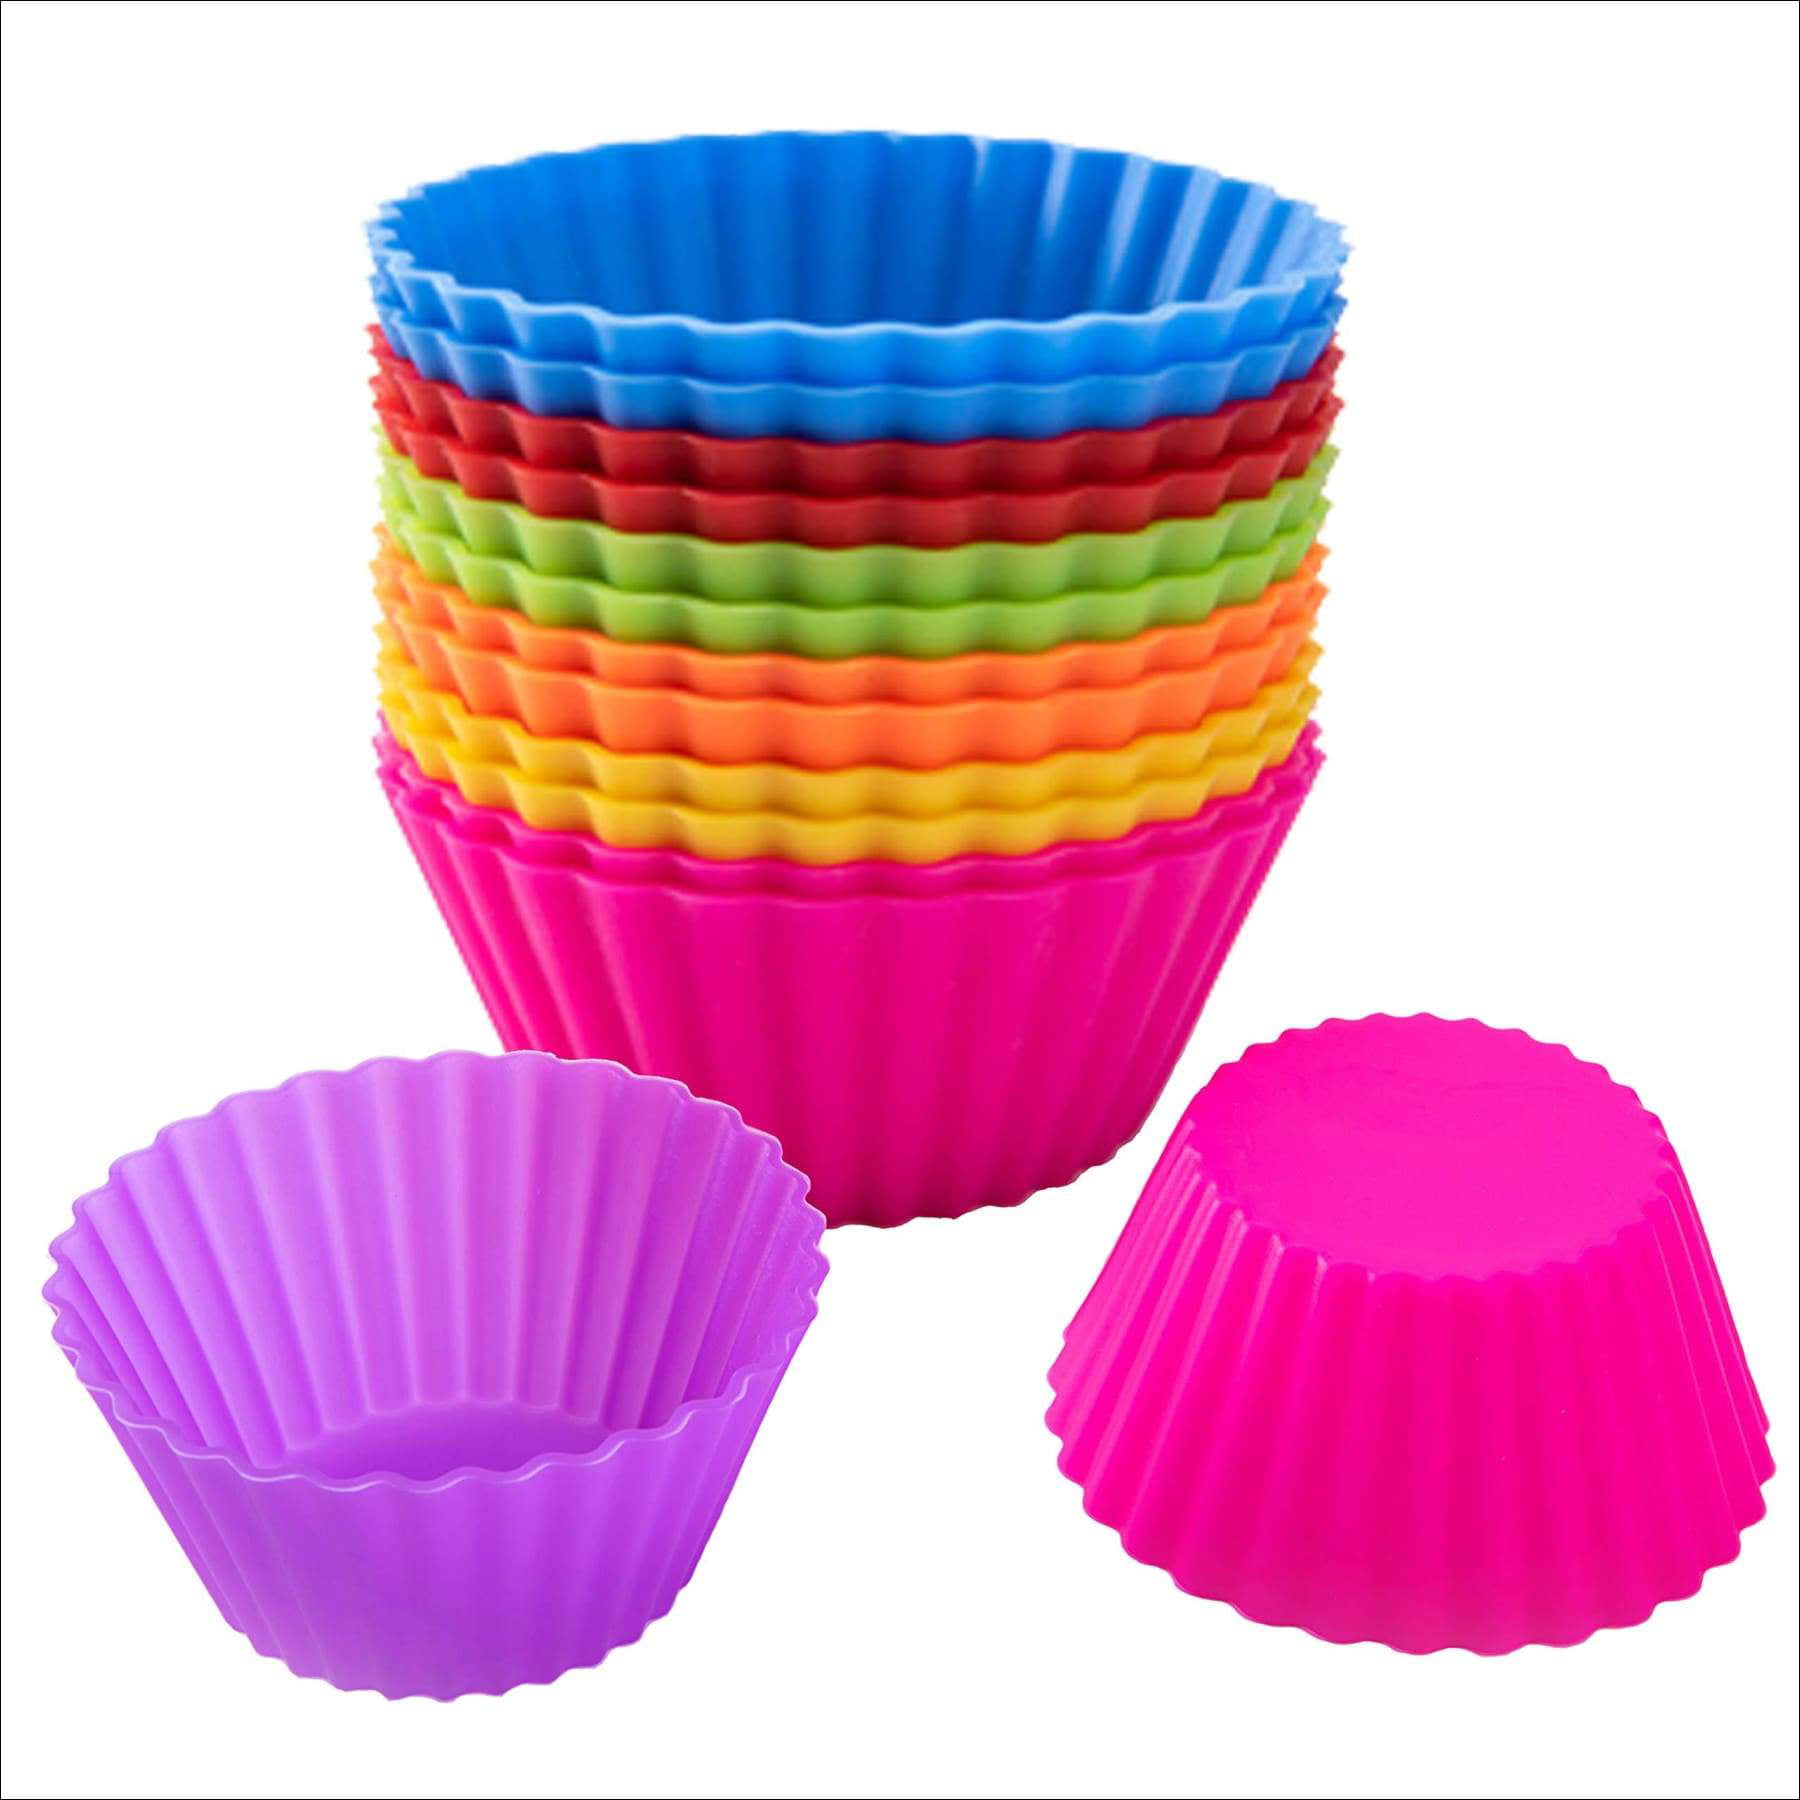 Pharamat Extra Large Silicone Cupcake Baking Cups 12 Pack, 3.54 Inch Non  Stick Cupcake and Muffin Liners, Reusable Jumbo Silicone Baking Cups Easy  to